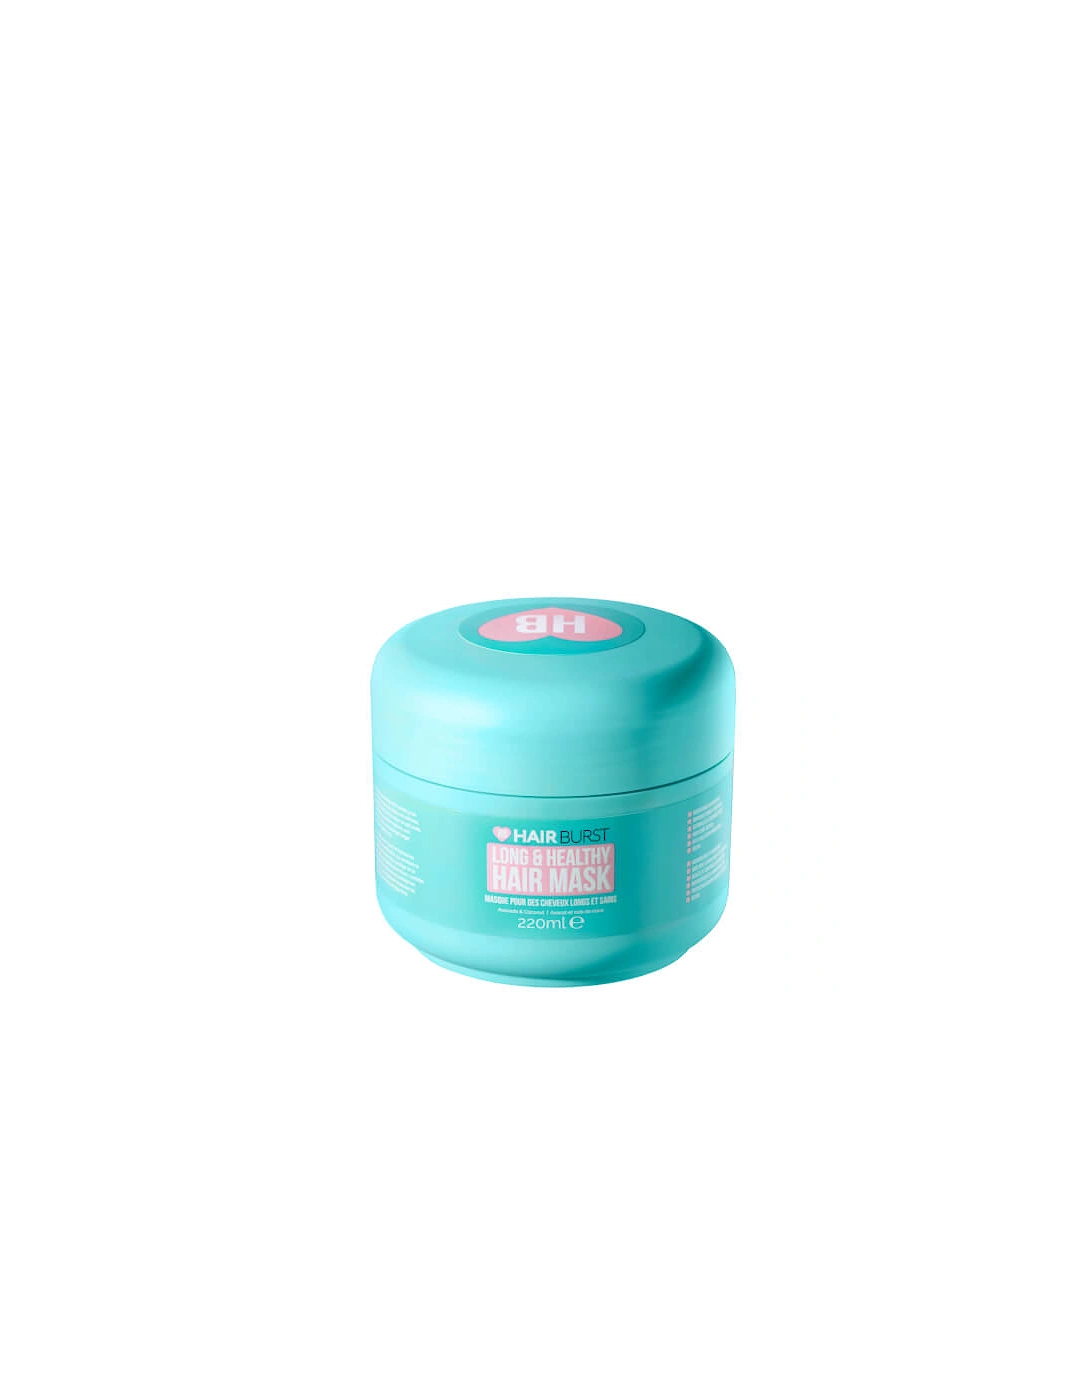 Long and Healthy Hair Mask 220ml - Hairburst, 2 of 1